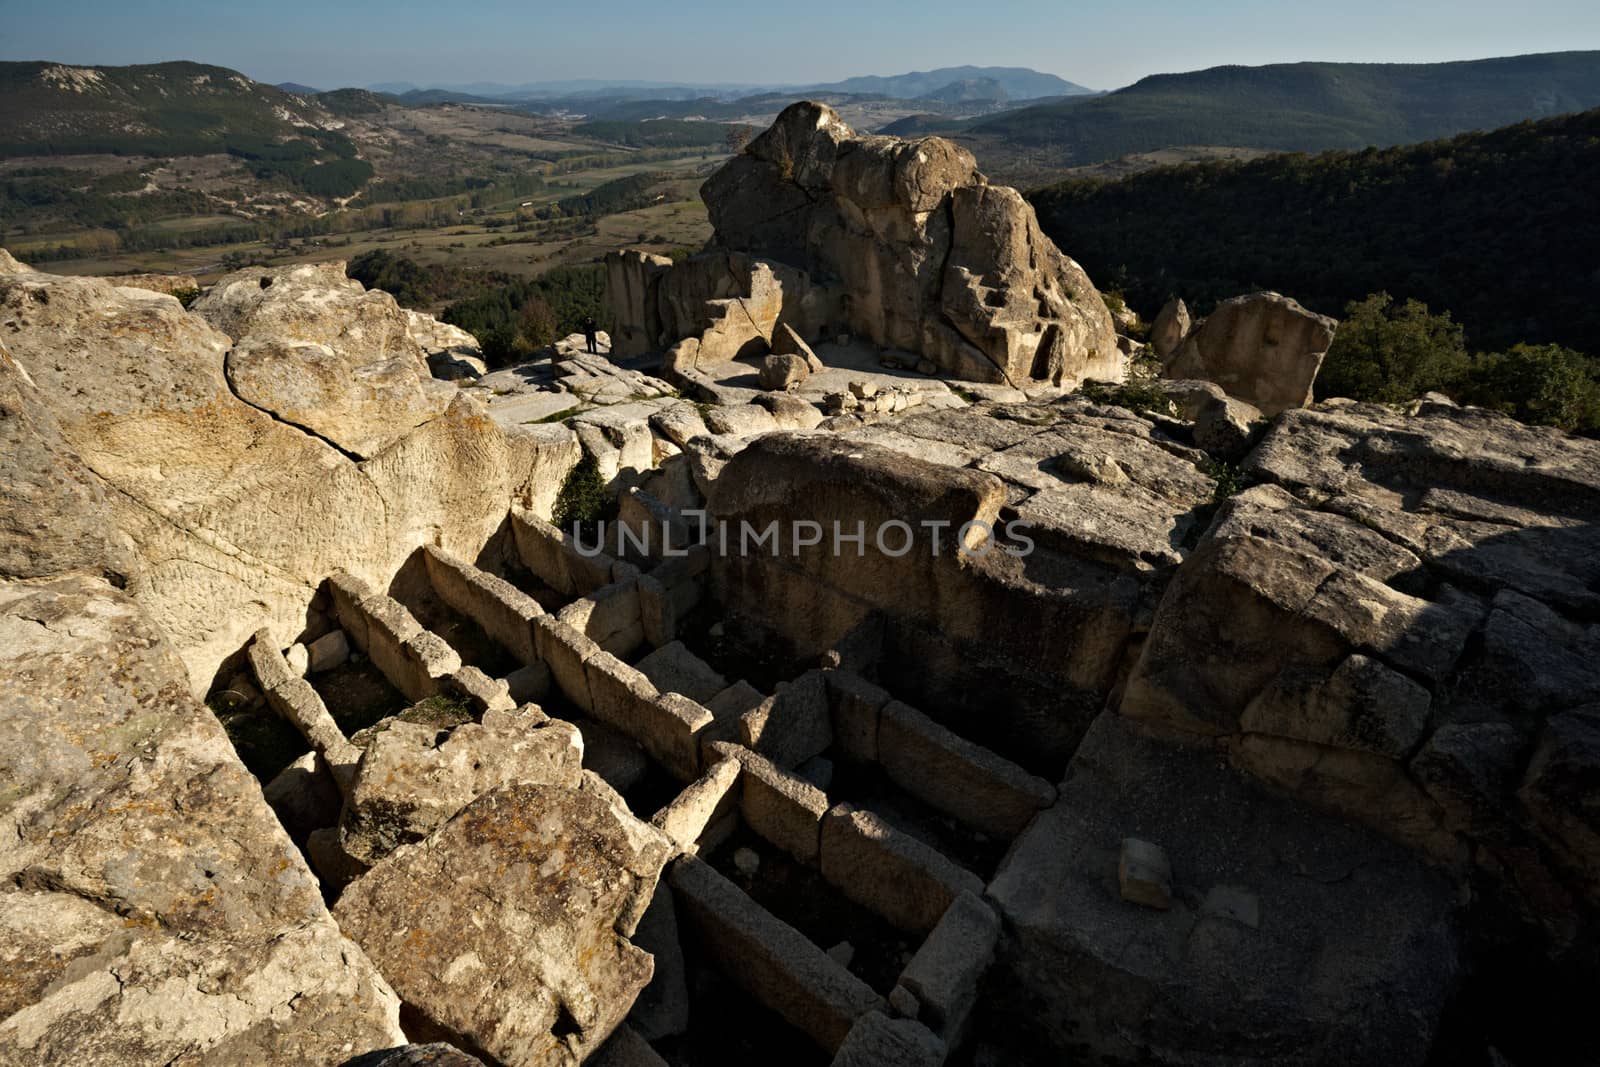 Perperikon vie from the top